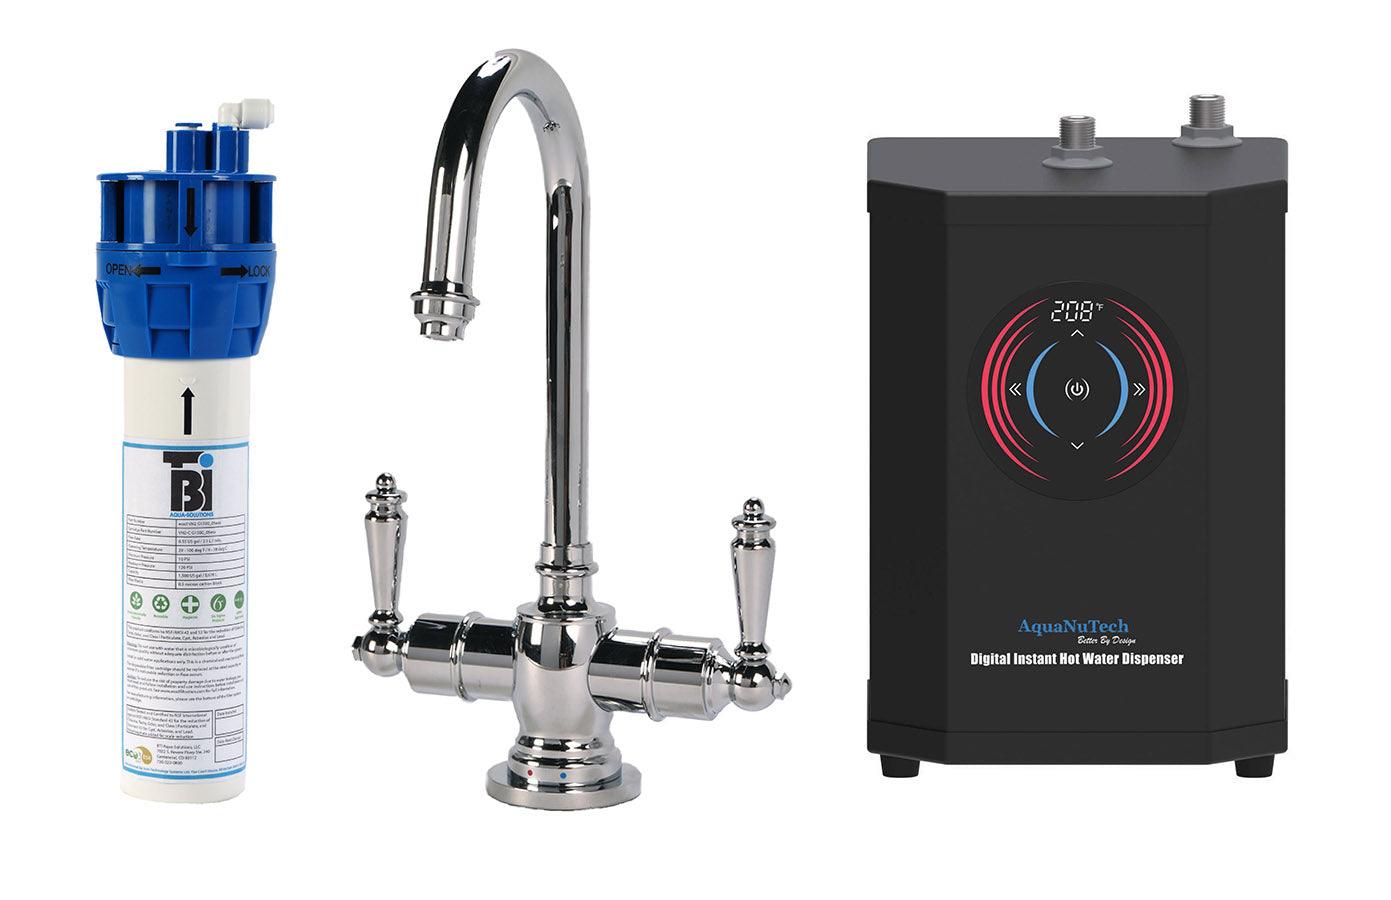 Filtration/Hot Water Combo - Traditional C-Spout Faucet With Digital Instant Hot Water Dispenser and Filtration System. Chrome